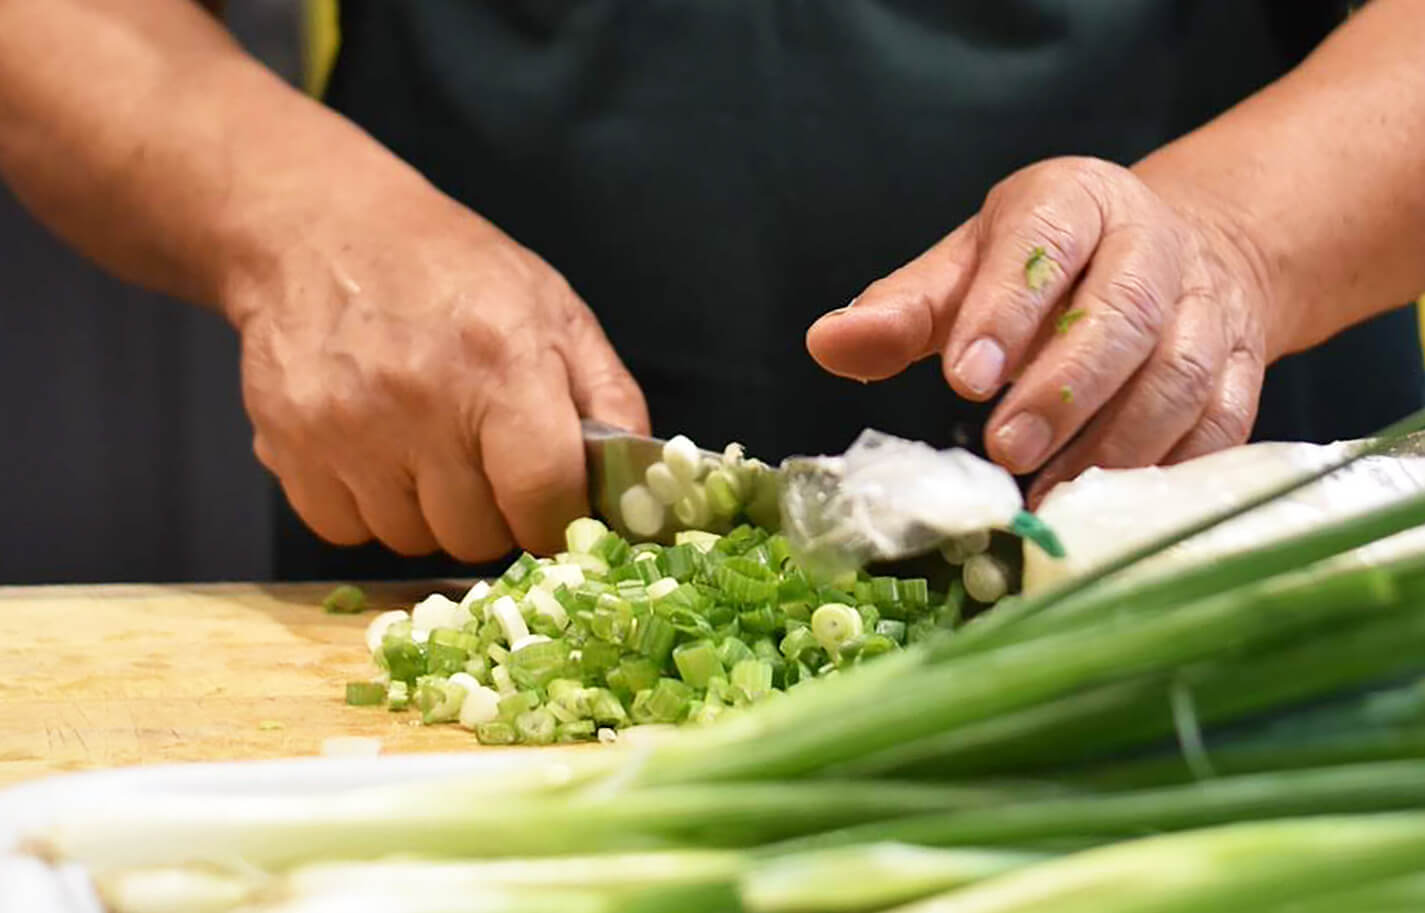 Explore Edmonton - Siu To Green Onion Cakes Cooking Class Get Cooking